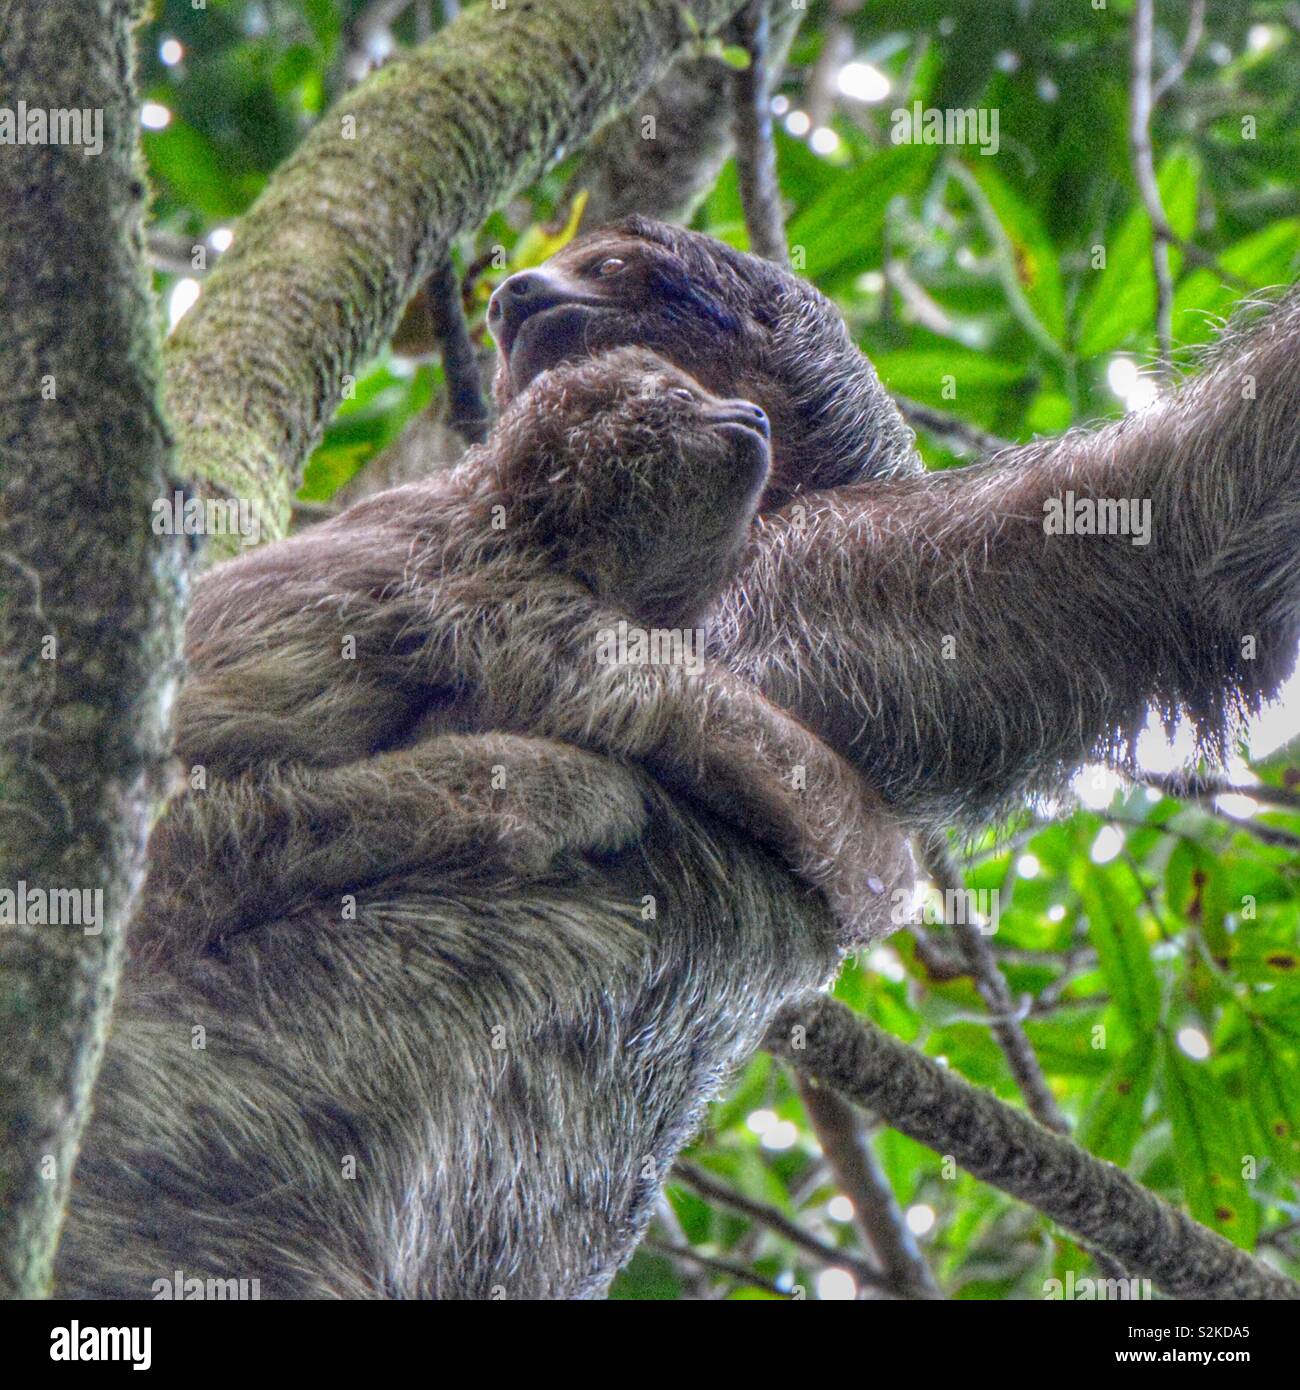 A close up of a mother and baby sloth hanging in a tree. Stock Photo